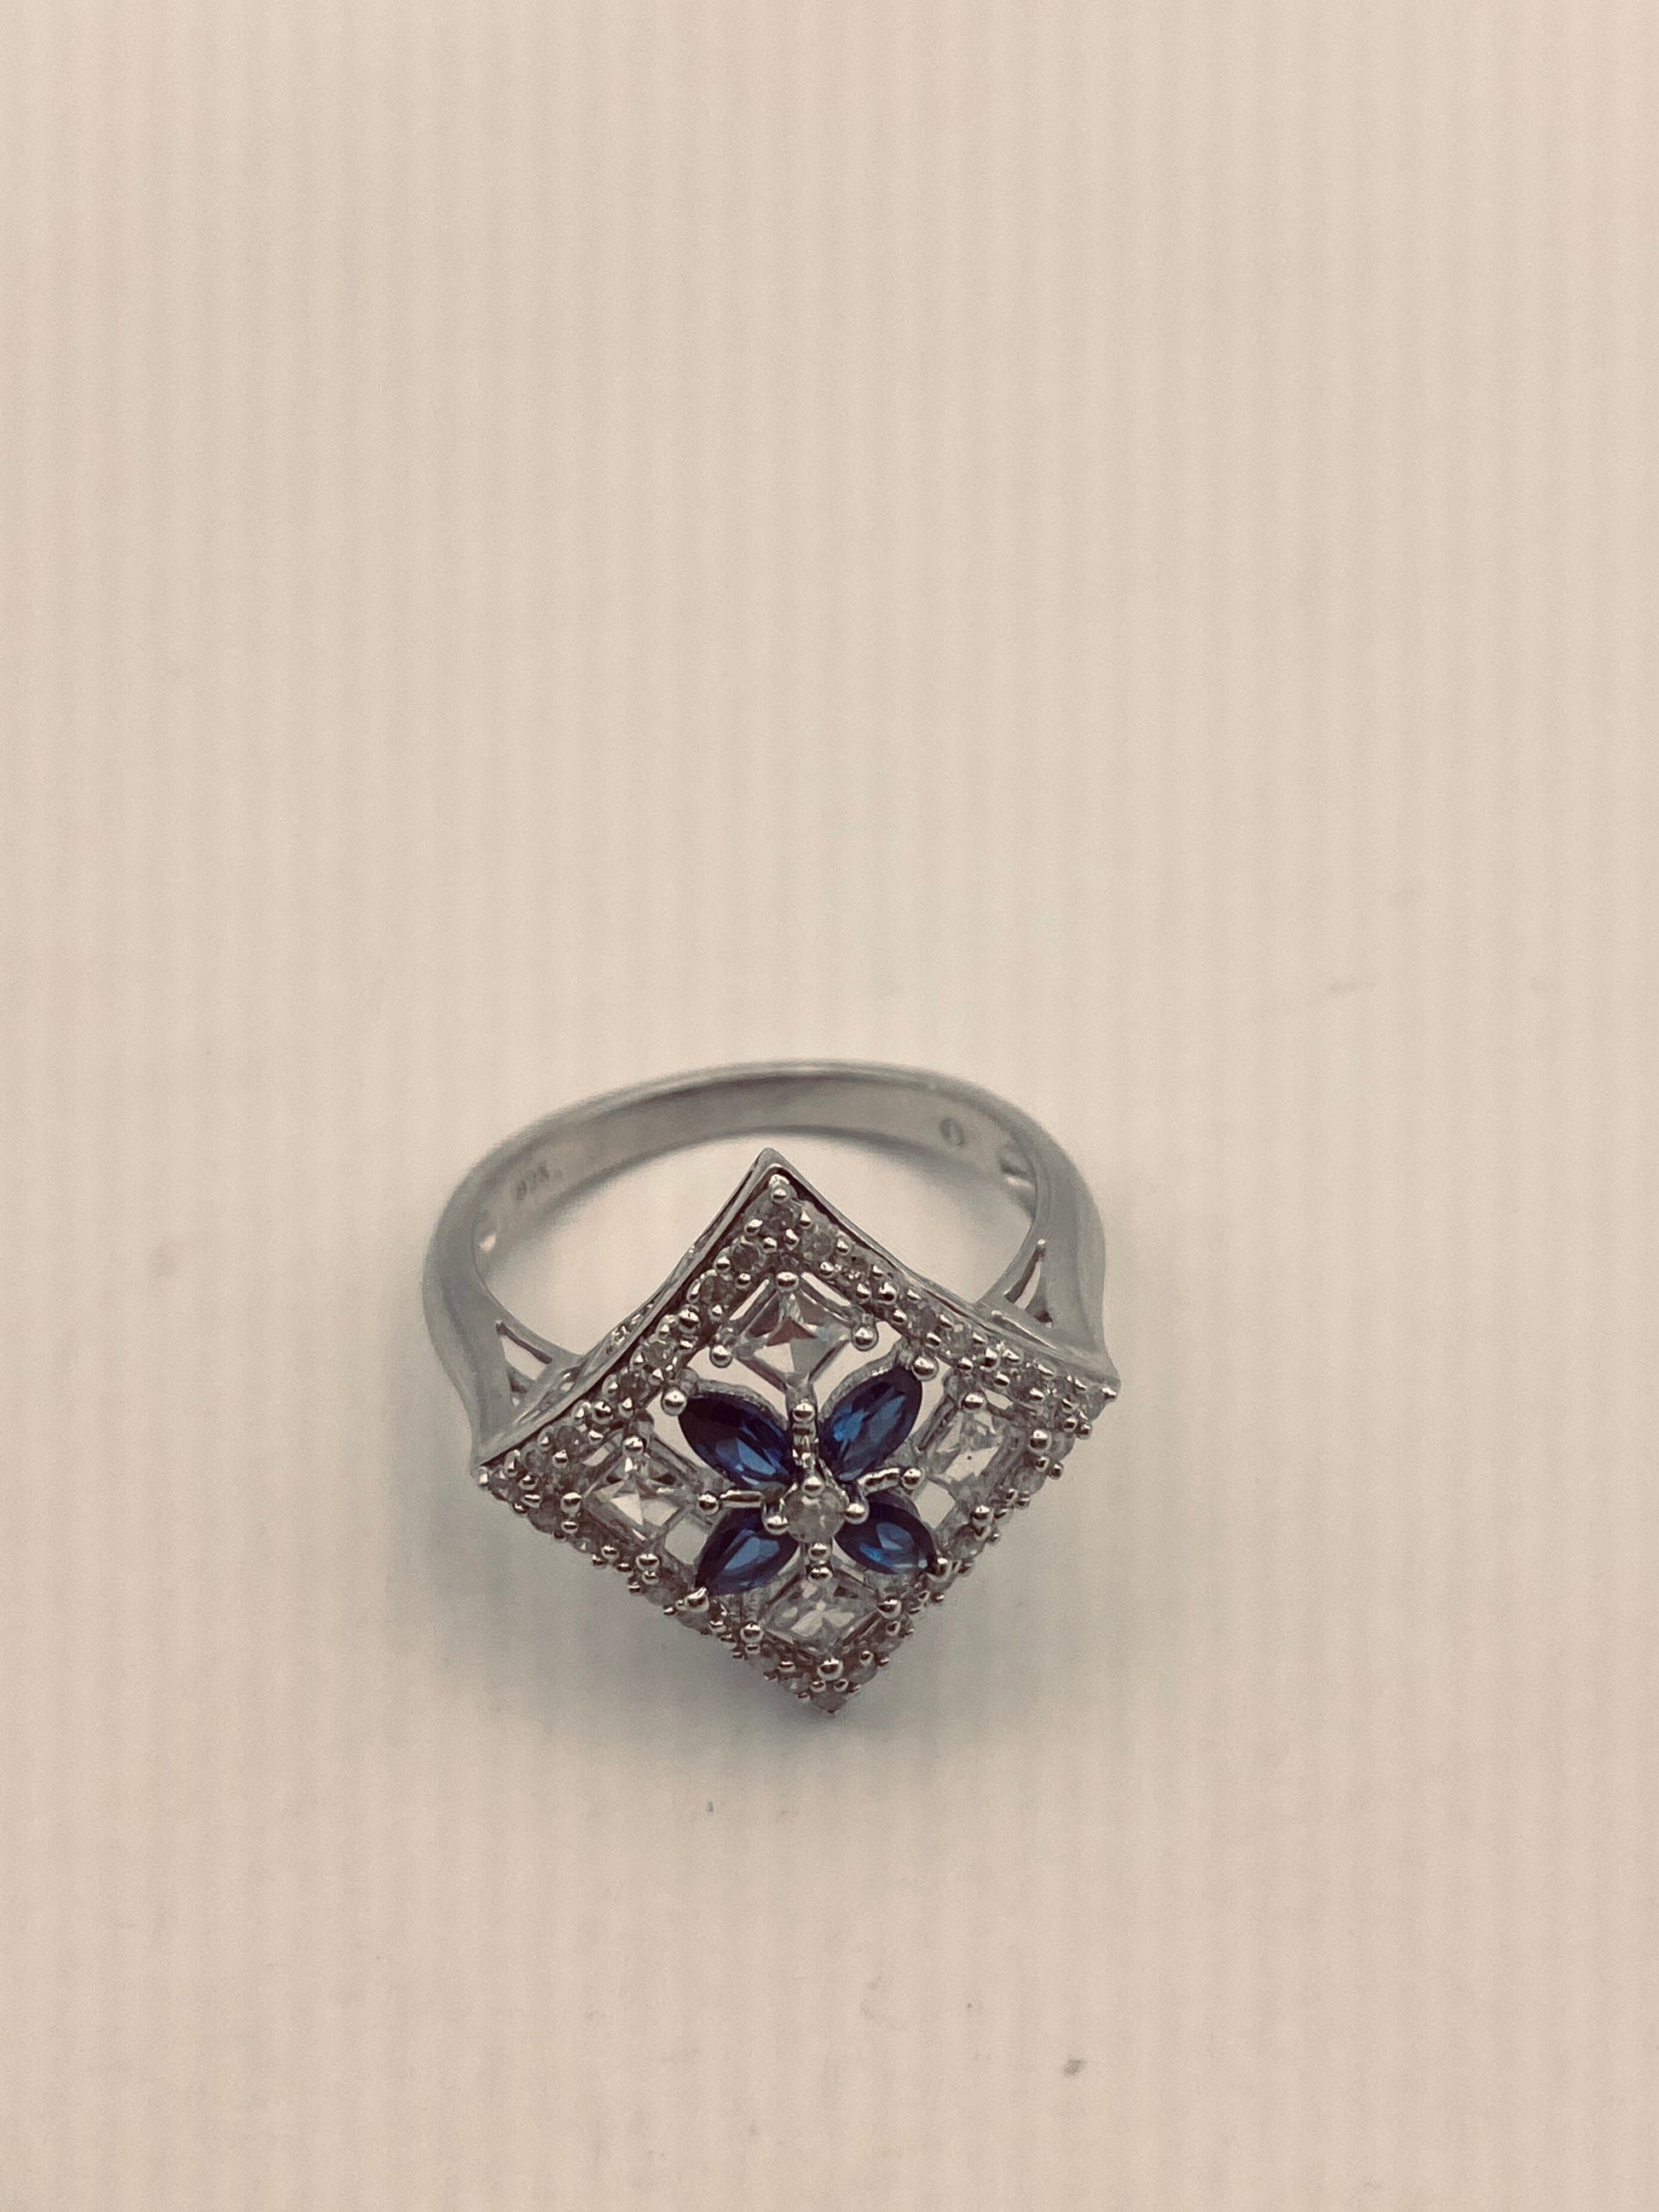 Vintage Blue Sapphire and White 925 Sterling Silver Gothic Ring